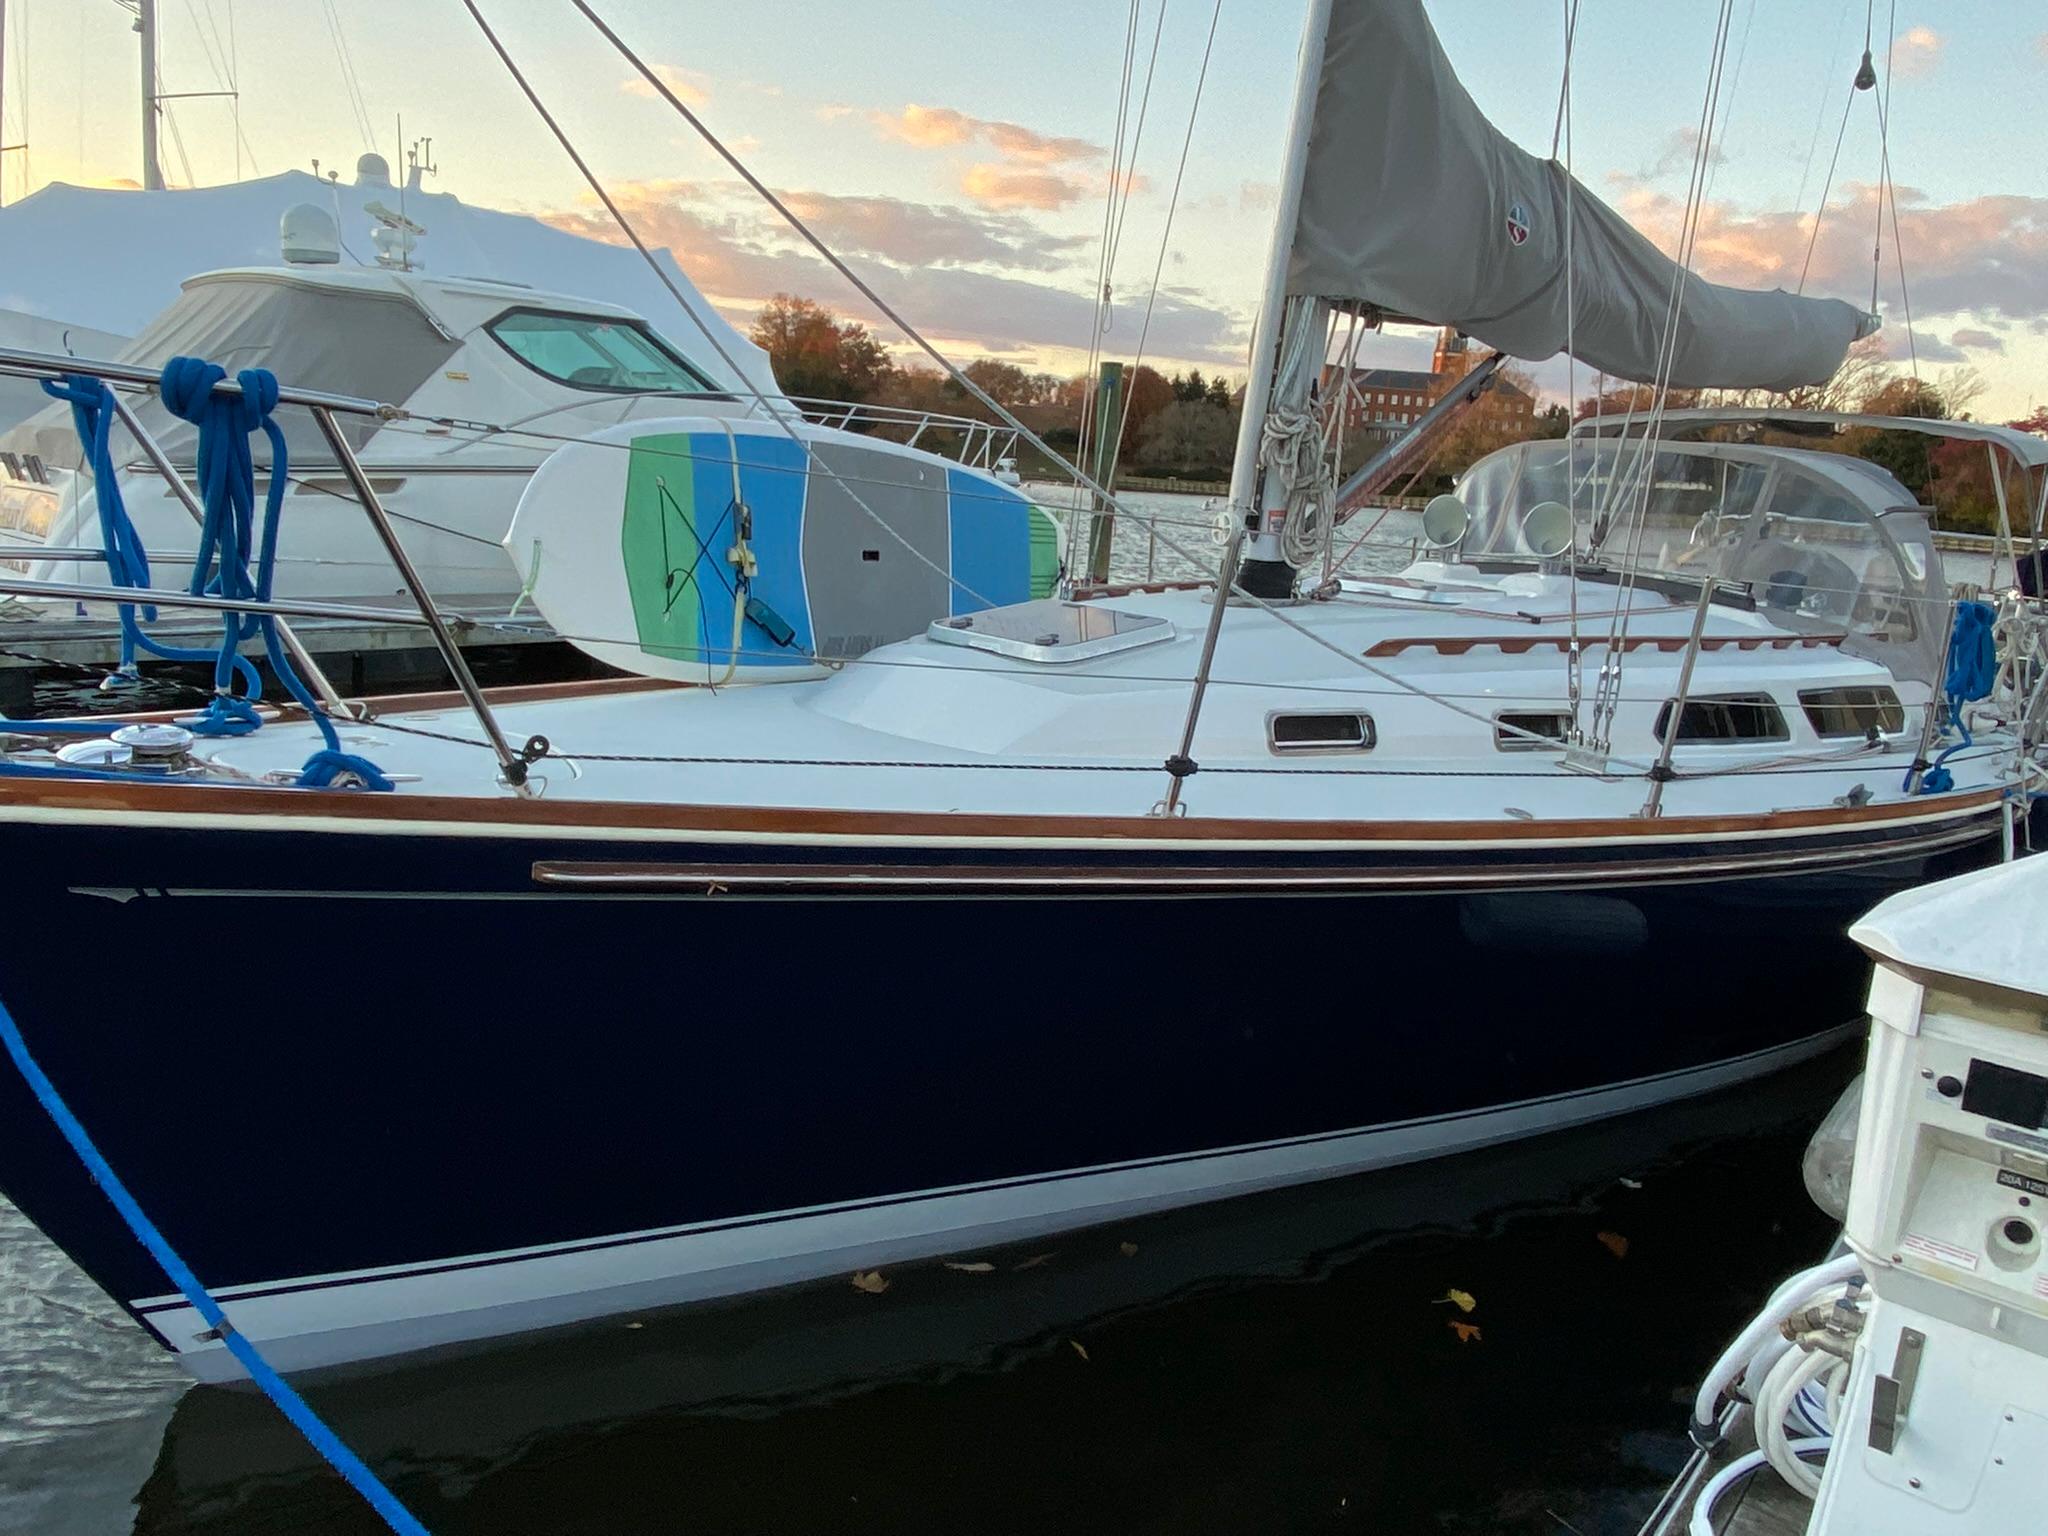 Whisper Yacht Brokers Of Annapolis